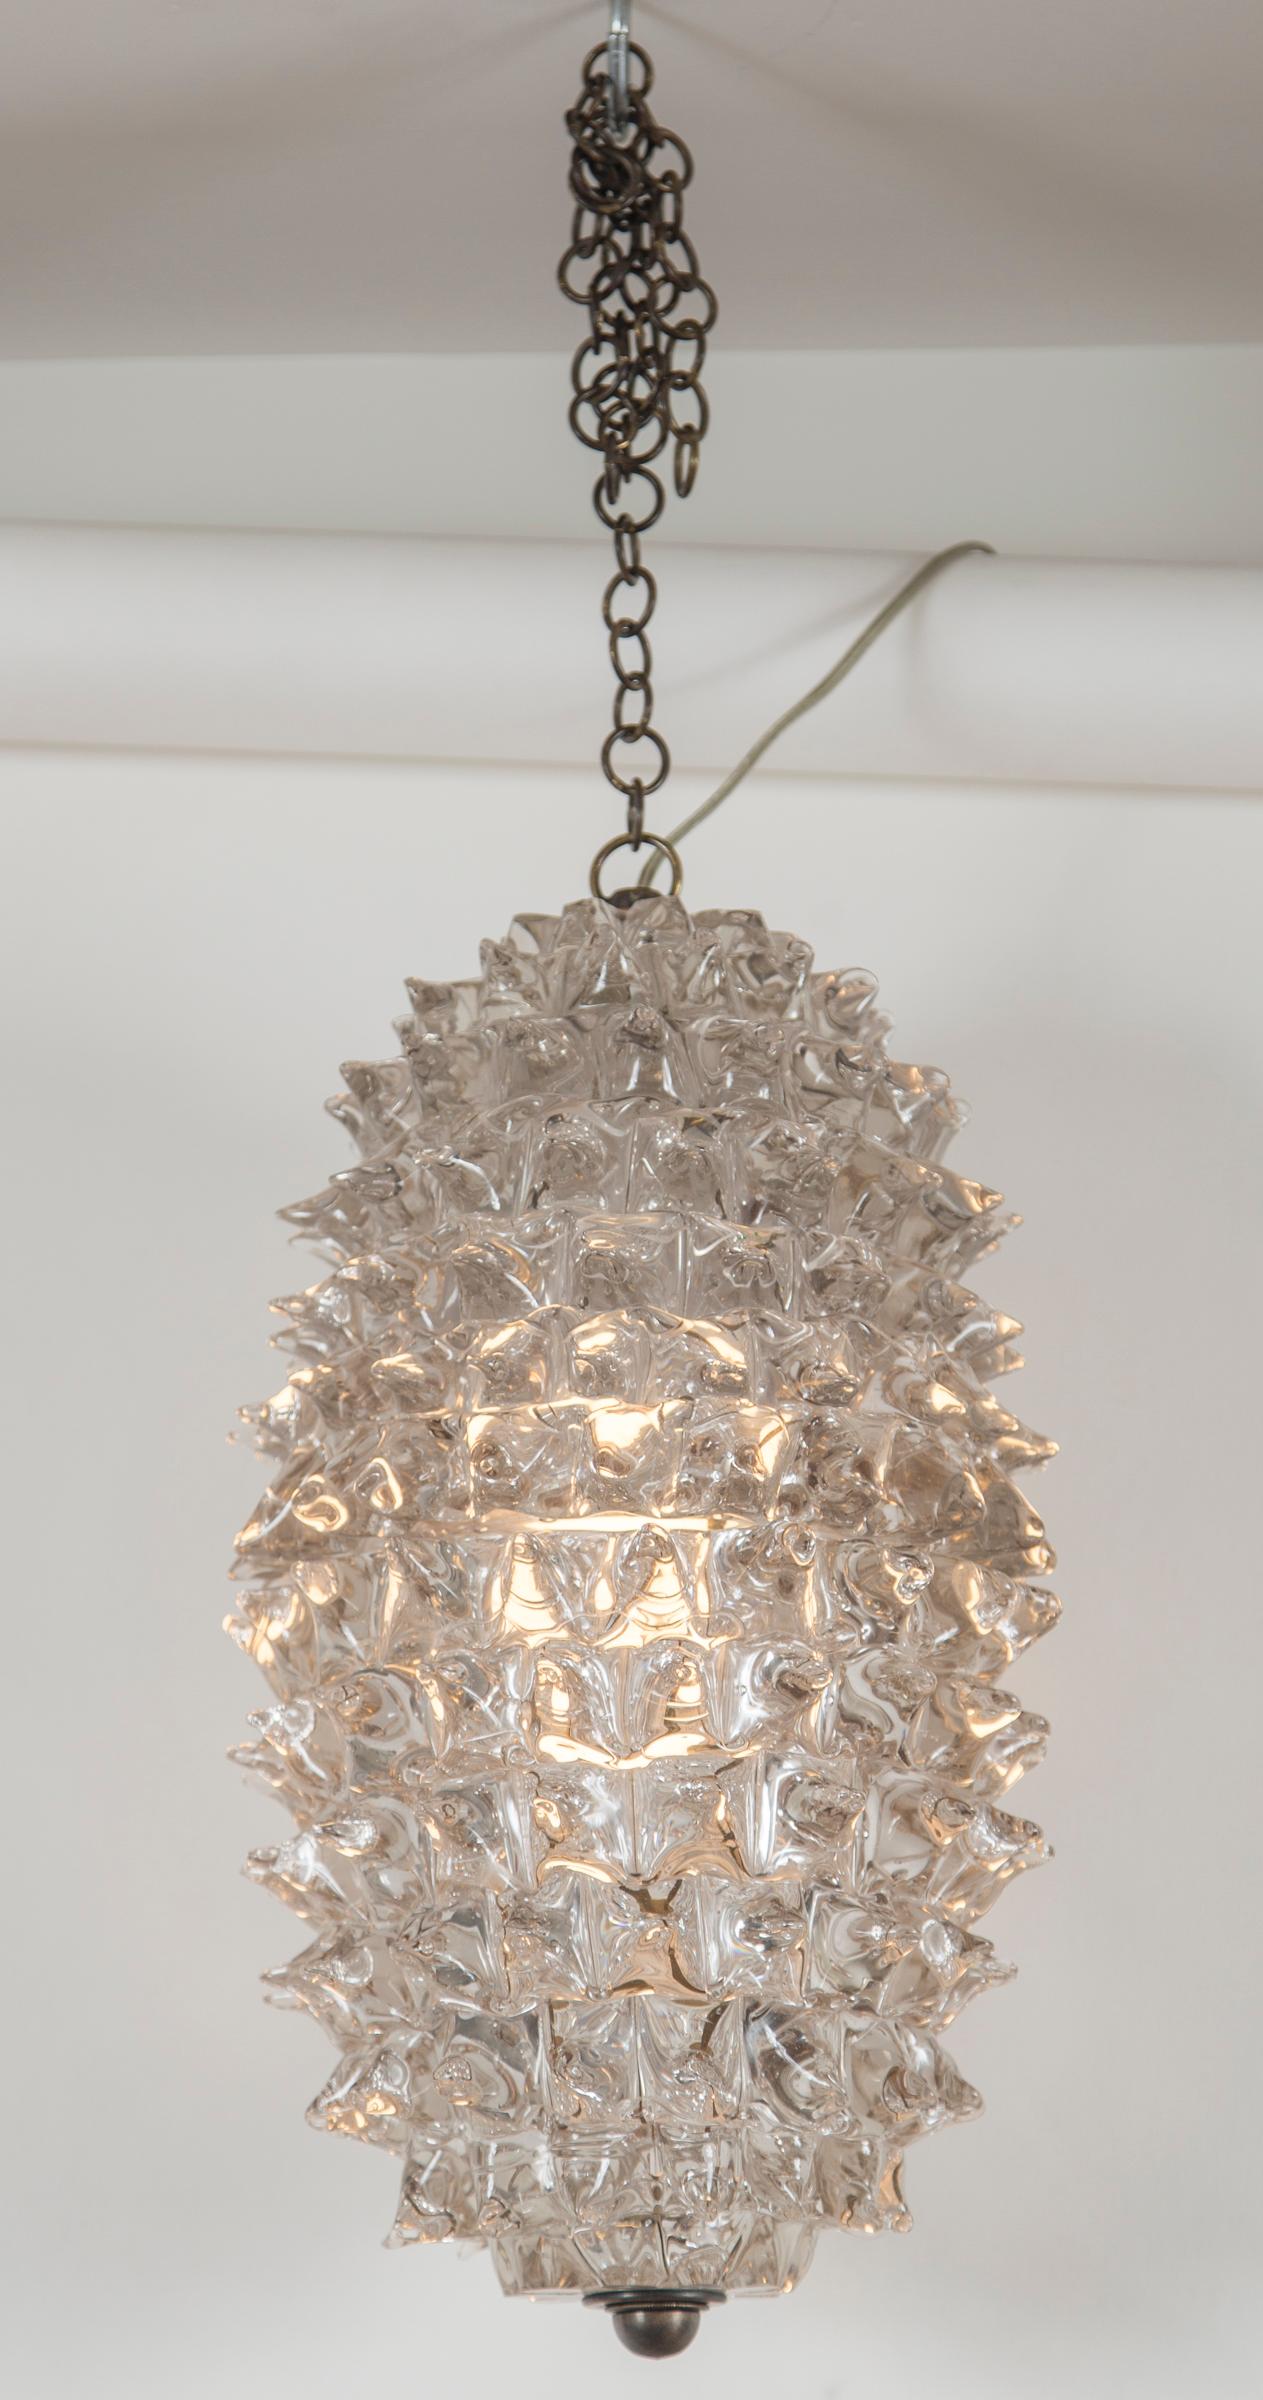 Italian Vintage Rostrato Oval Ceiling Pendant by Ercole Barovier